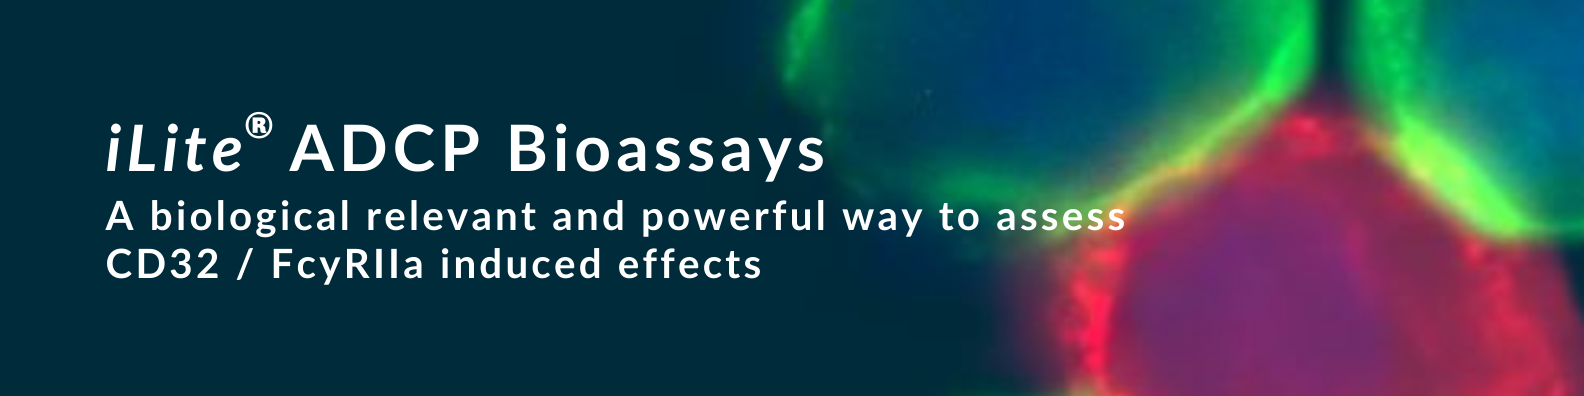 iLite  ADCP Bioassays  - A biological relevant and powerful way to assess CD32 / FcyRIIa induced effects